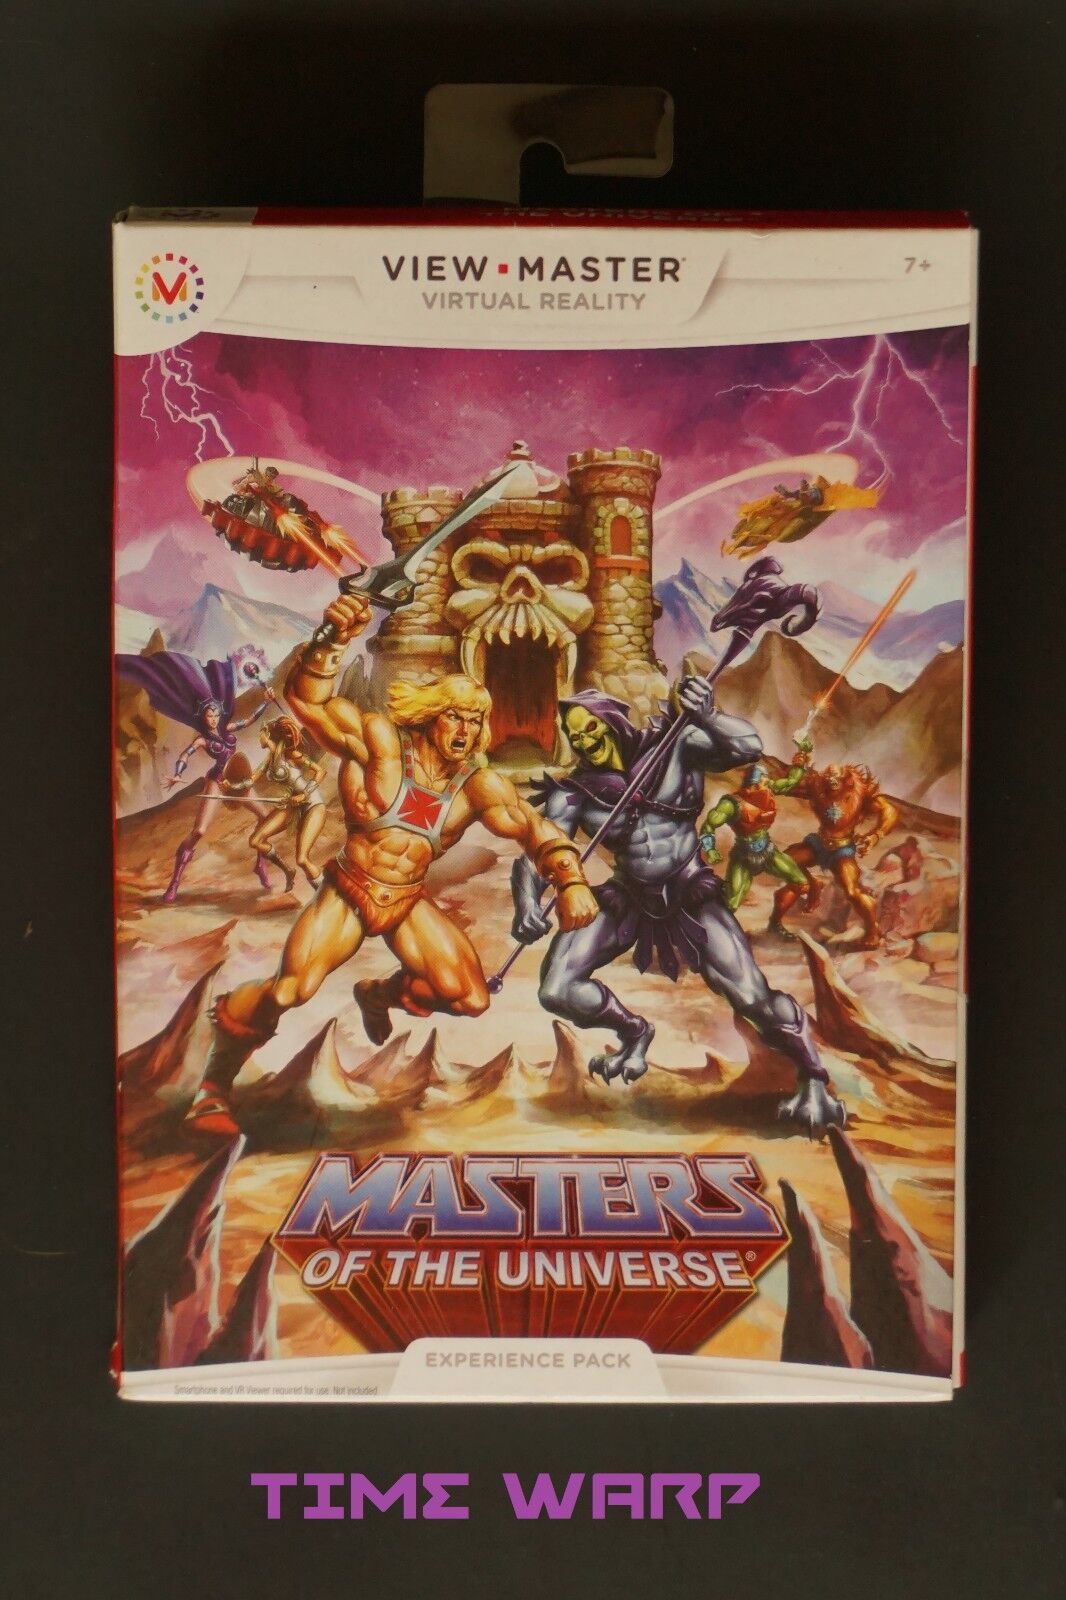 VIEW MASTER VIRTUAL REALITY MASTERS UNIVERSE P EXPERIENCE Easy-to-use OF THE Ranking TOP14